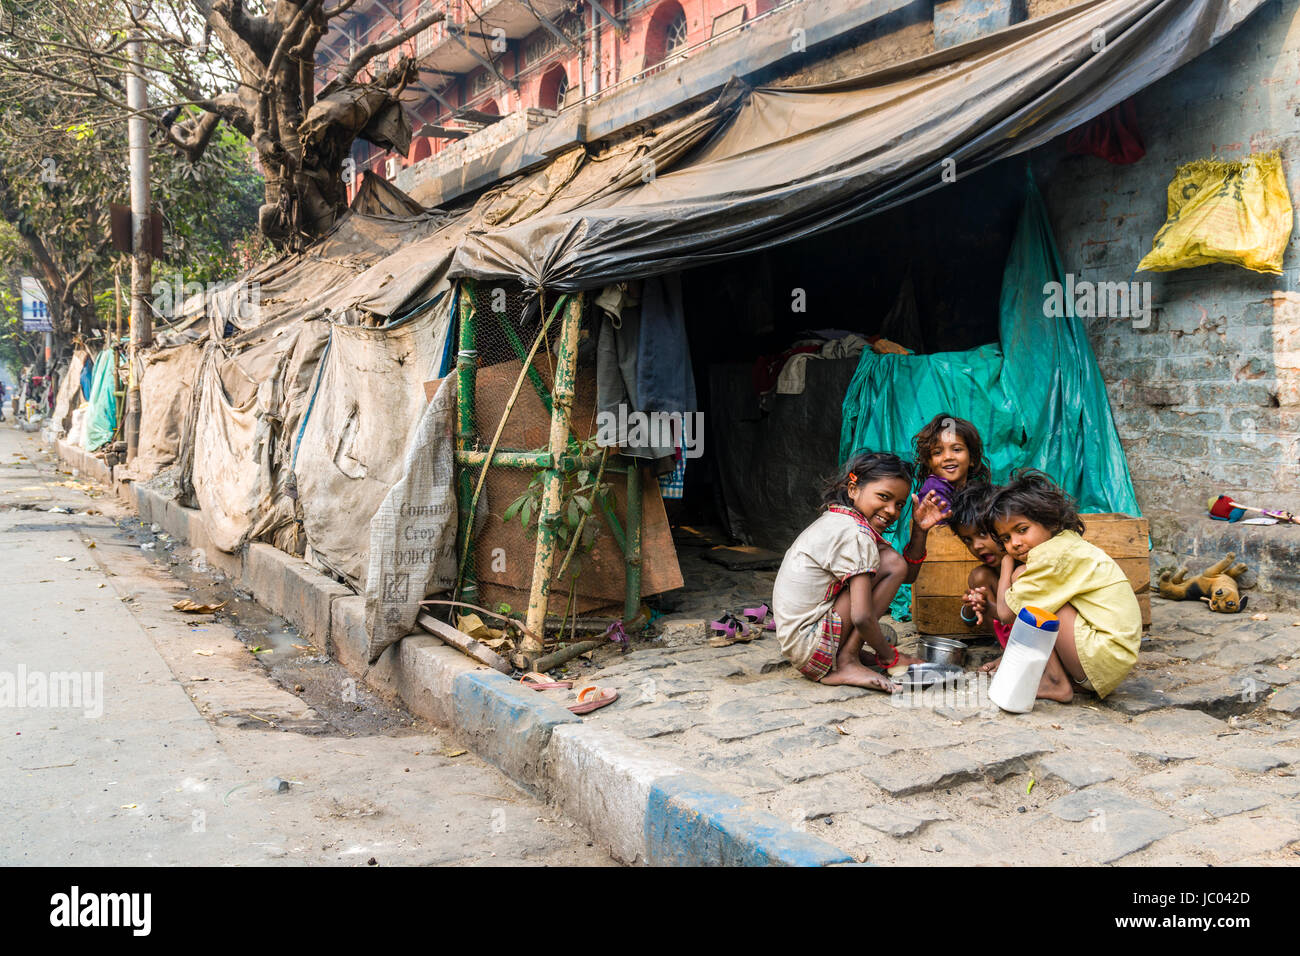 Children are sitting and playing in front of slum dwellings in the suburb China Bazar Stock Photo